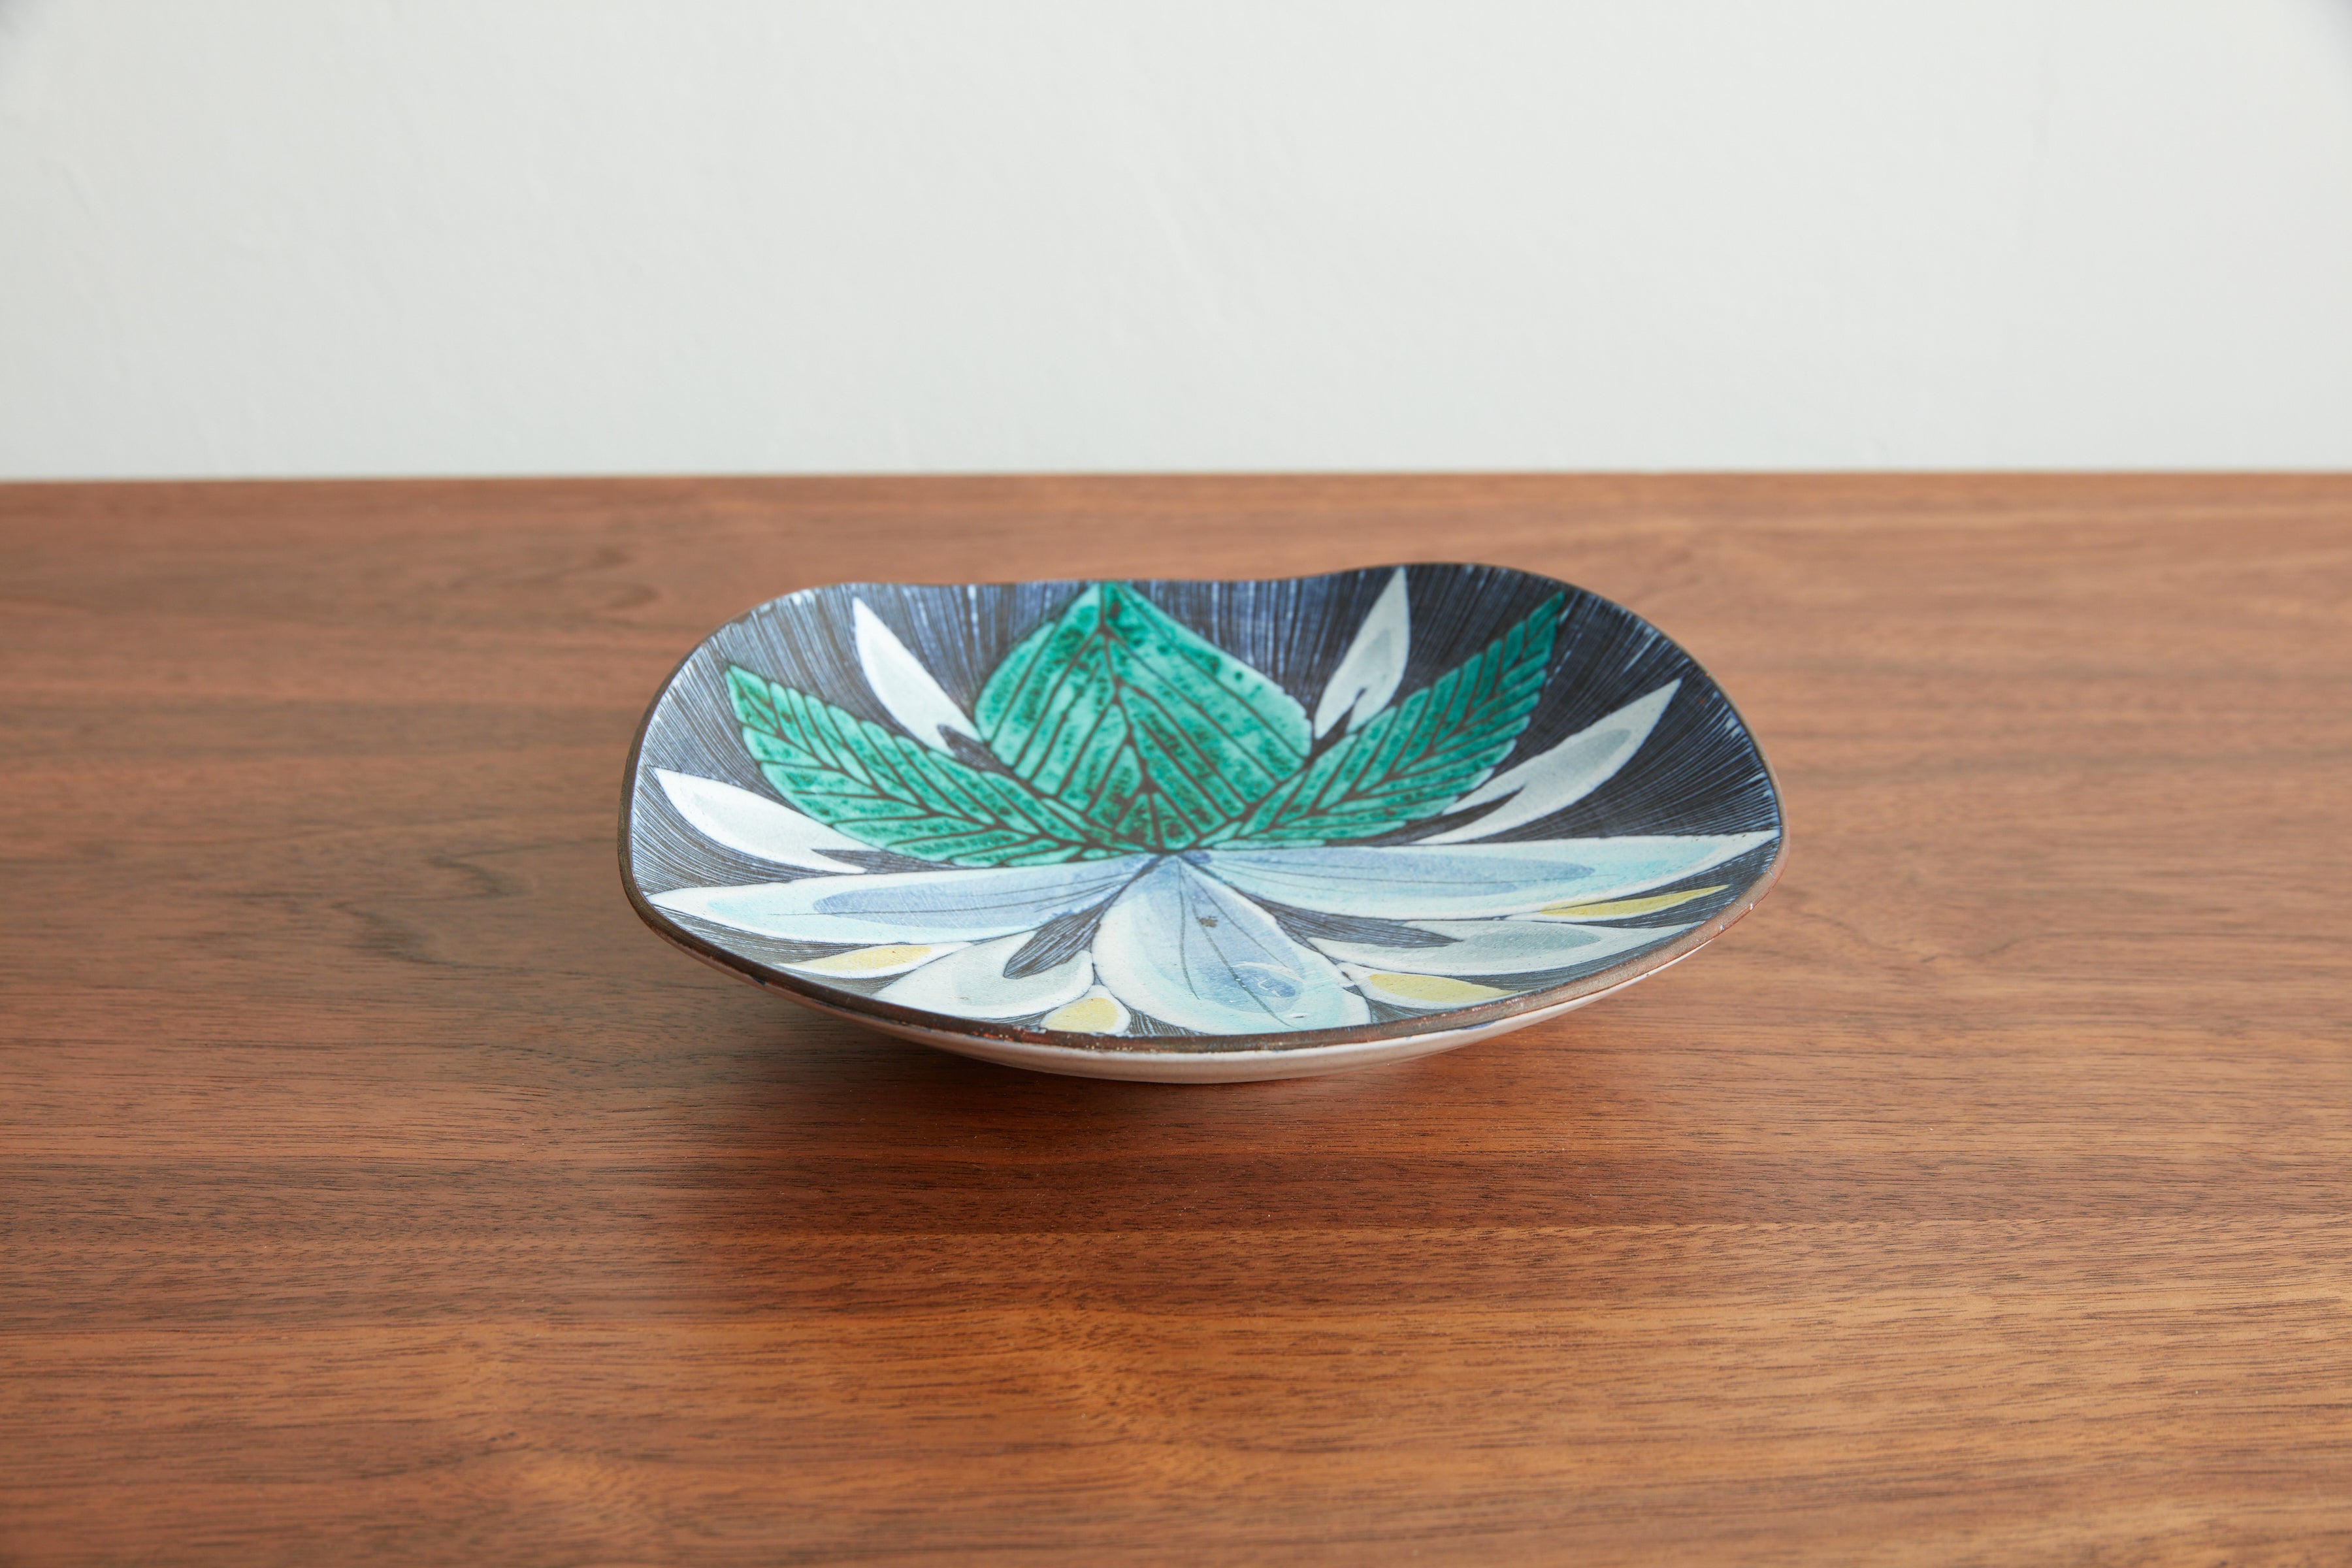 1950s Vintage ceramic dish by Swedish artist Mari Simmulson (signed)
Beautifully painted with lotus flower.